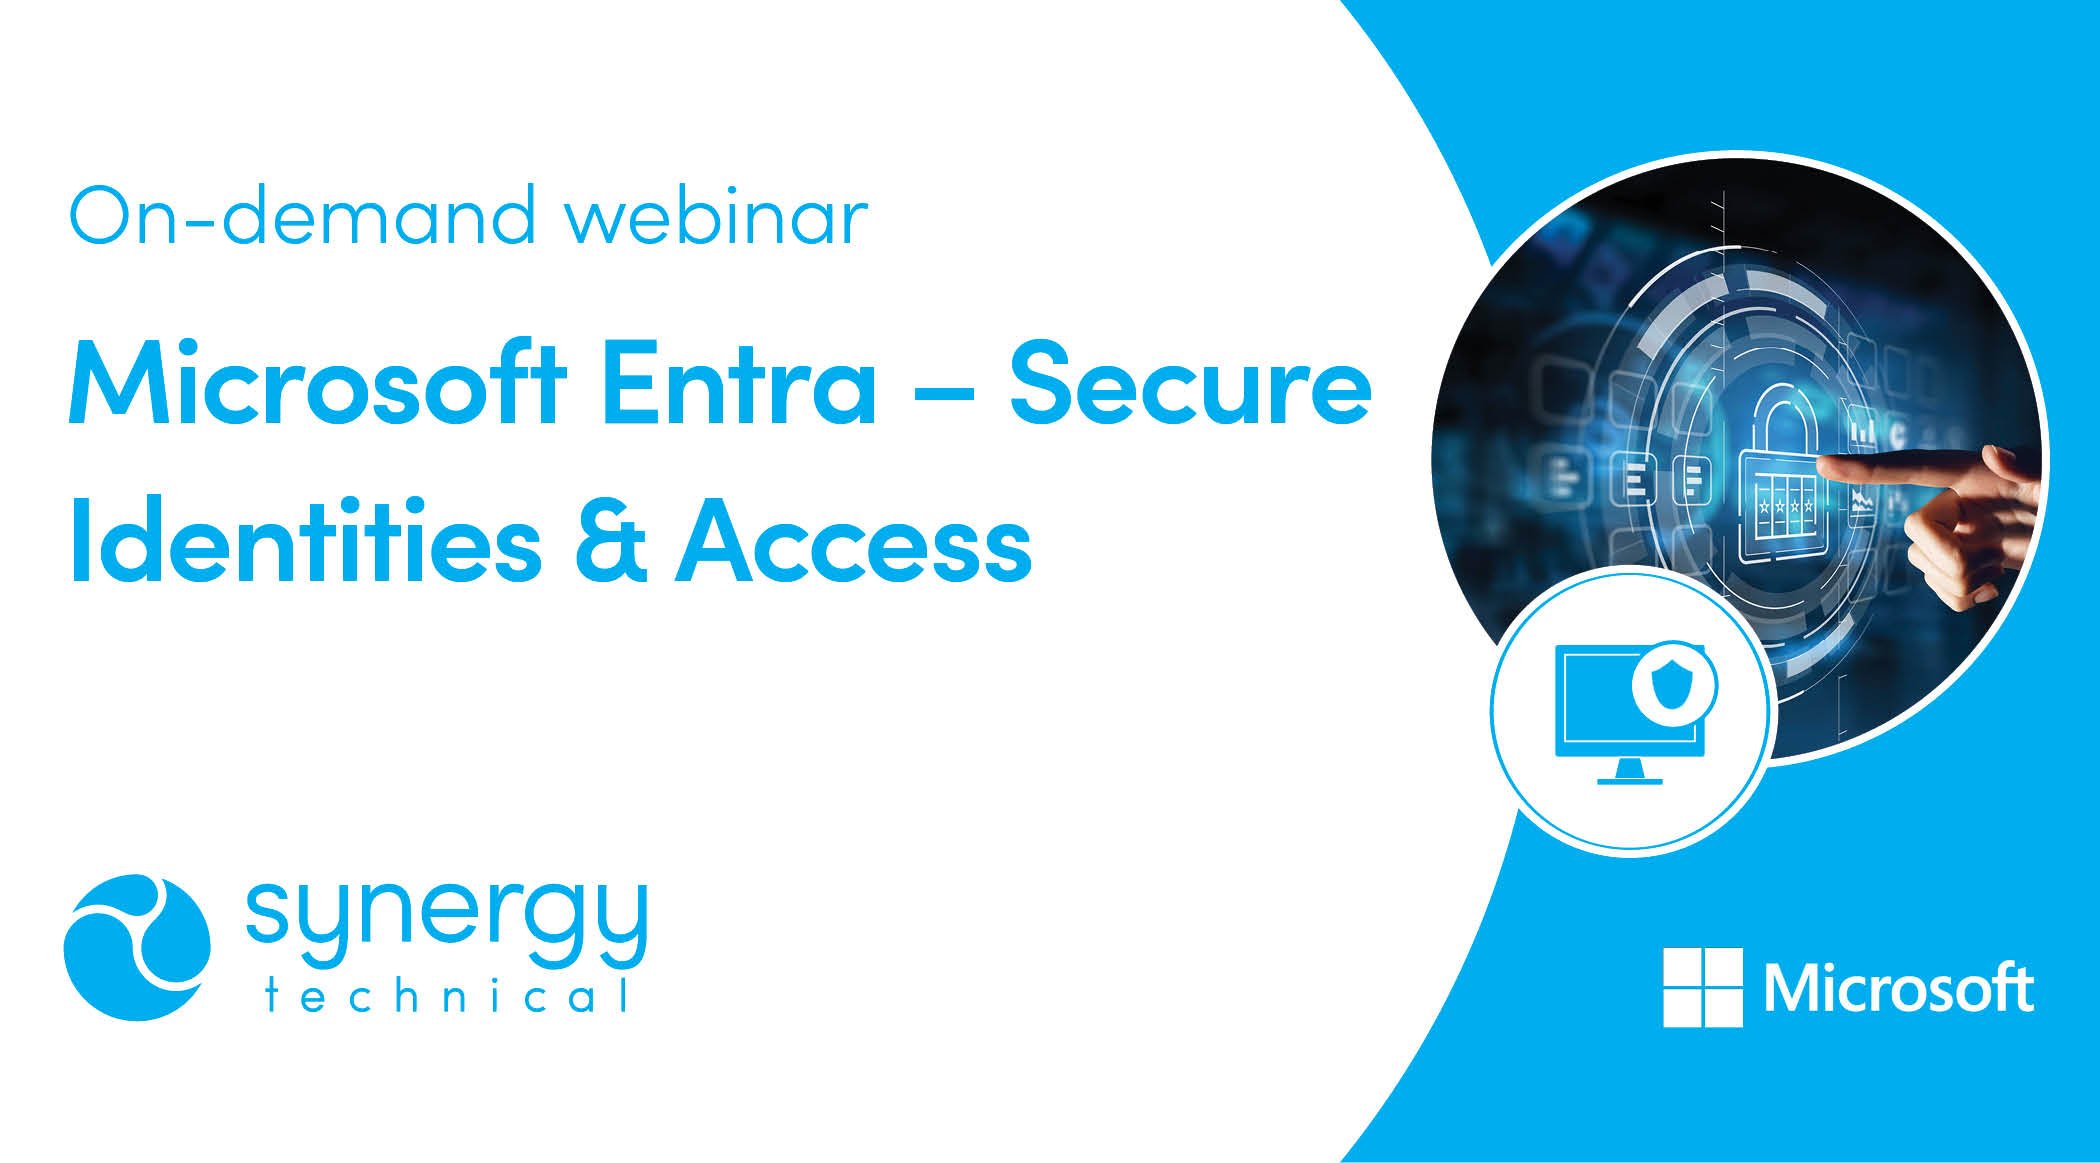 Microsoft Entra – Secure Identities & Access